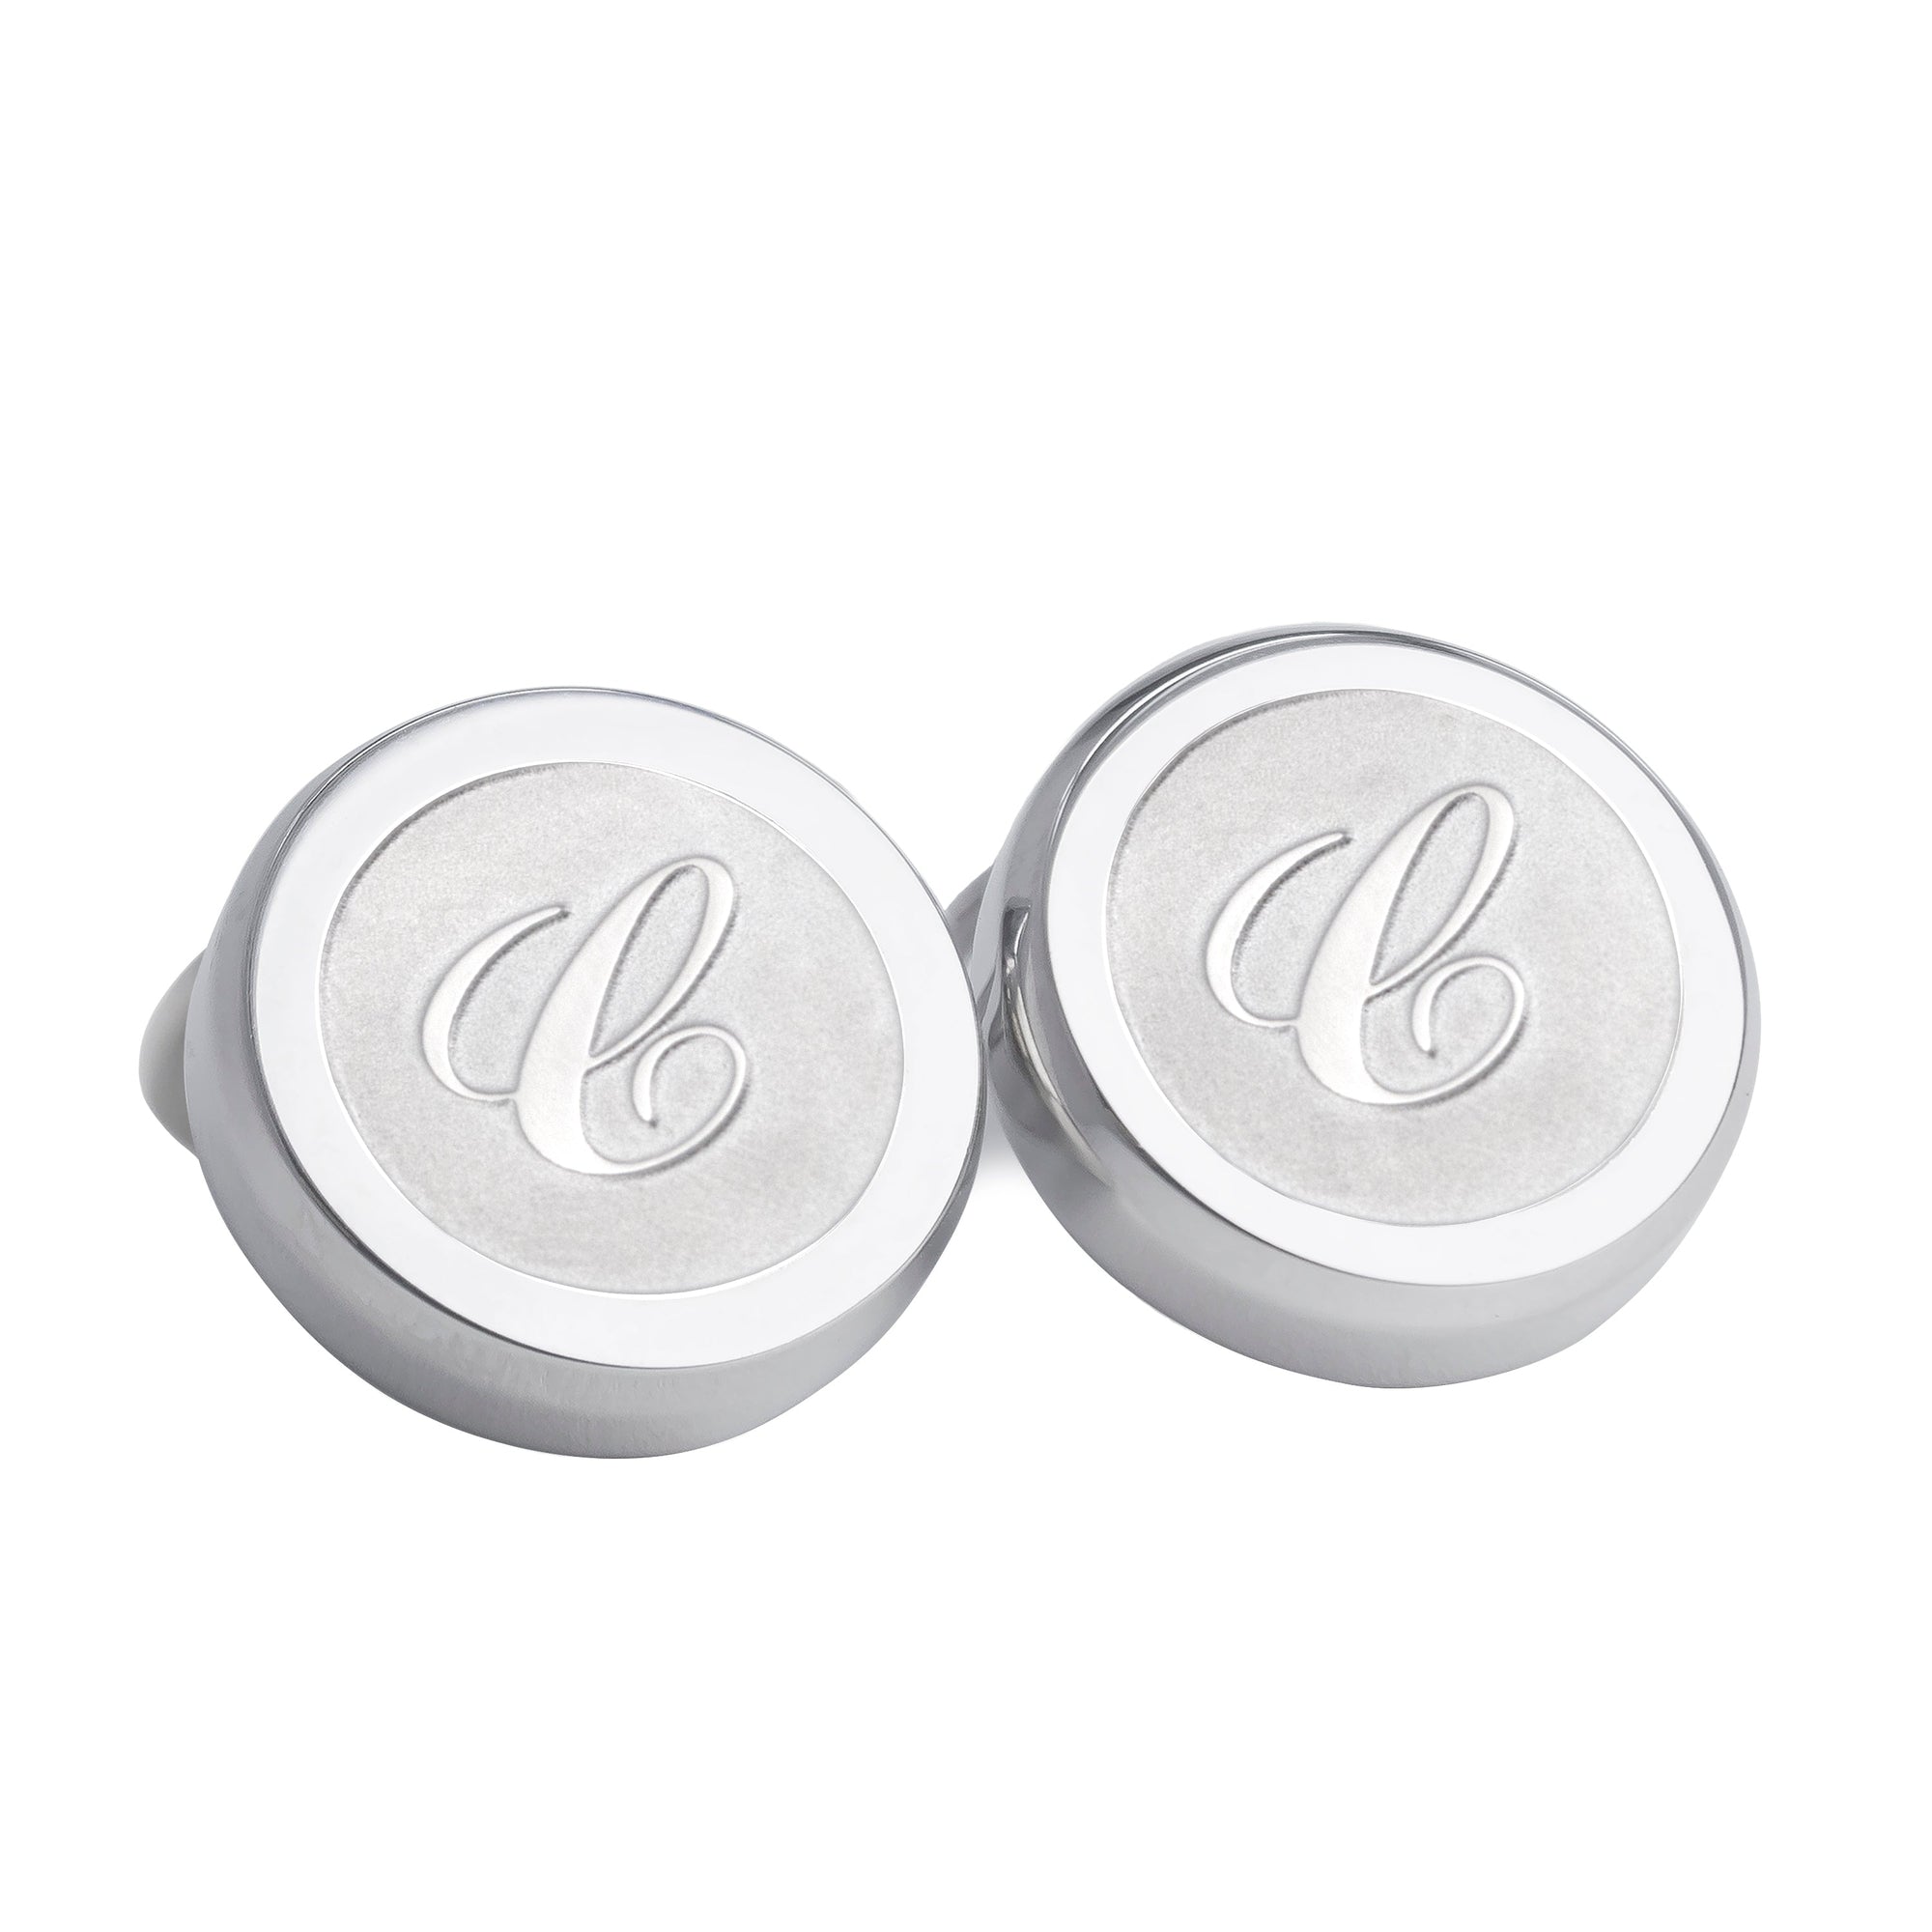 Monogram Etched Silver Clip-on Button Covers-Button Covers-A.Azthom-C-Cufflinks.com.sg